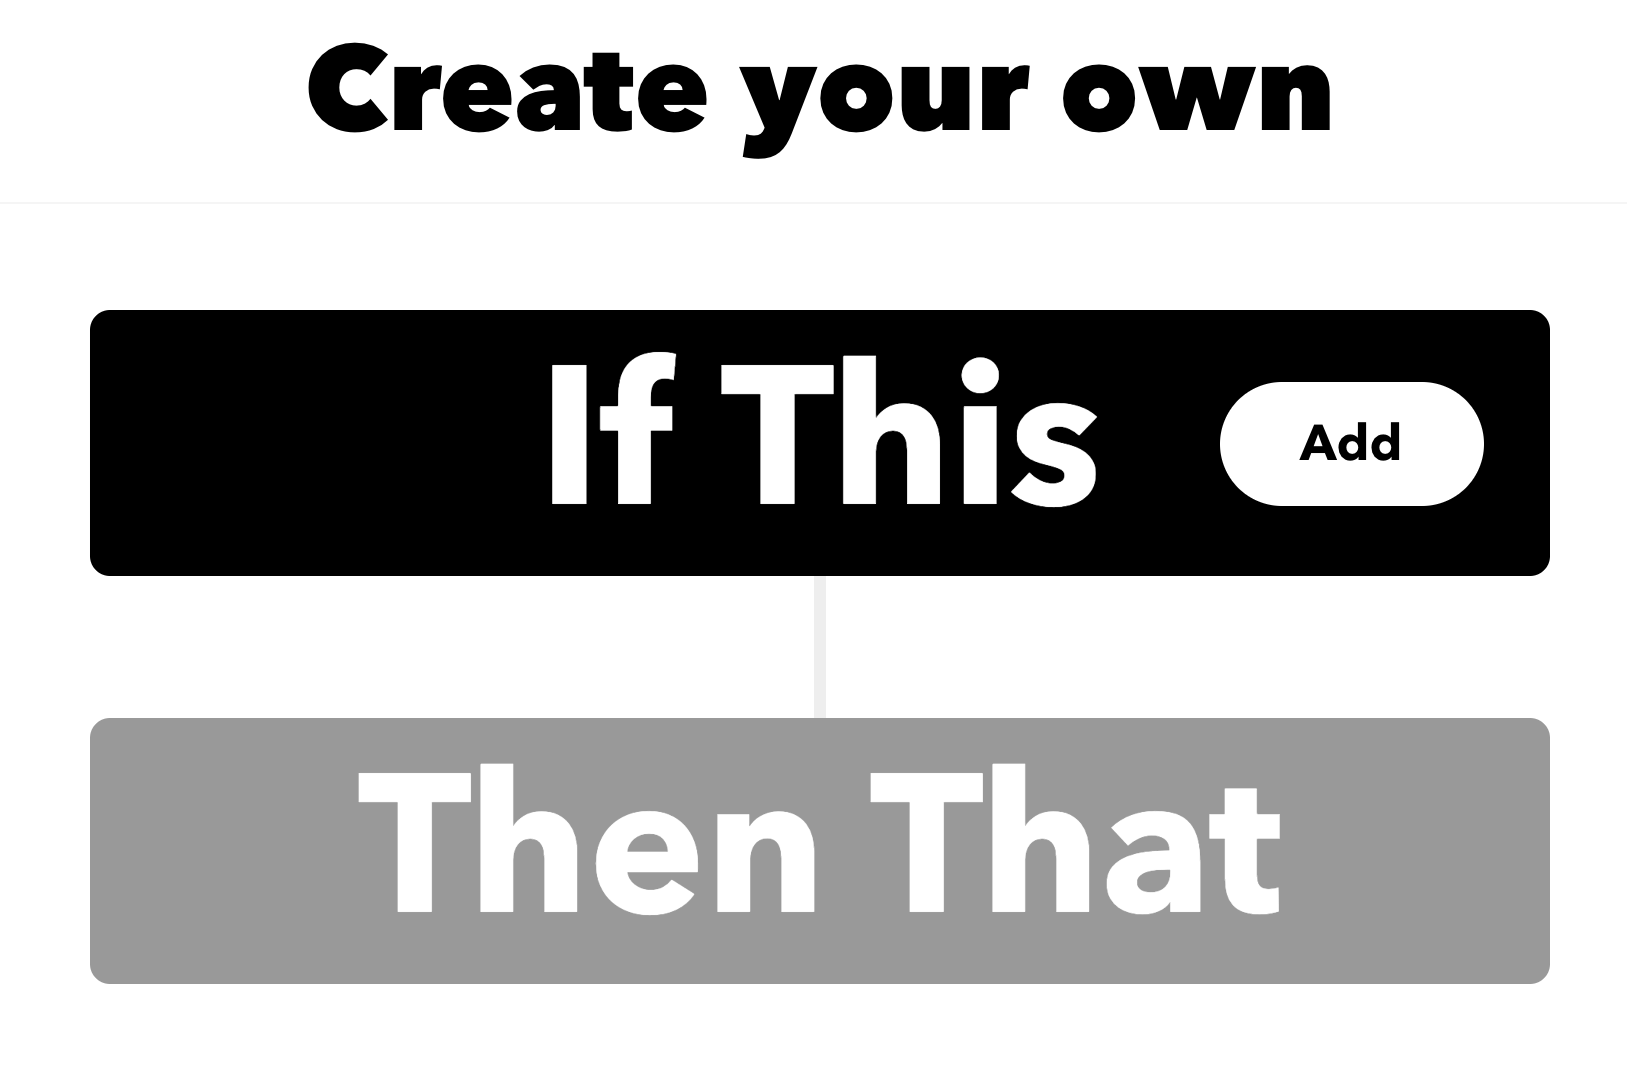 Create your own - if this - then that